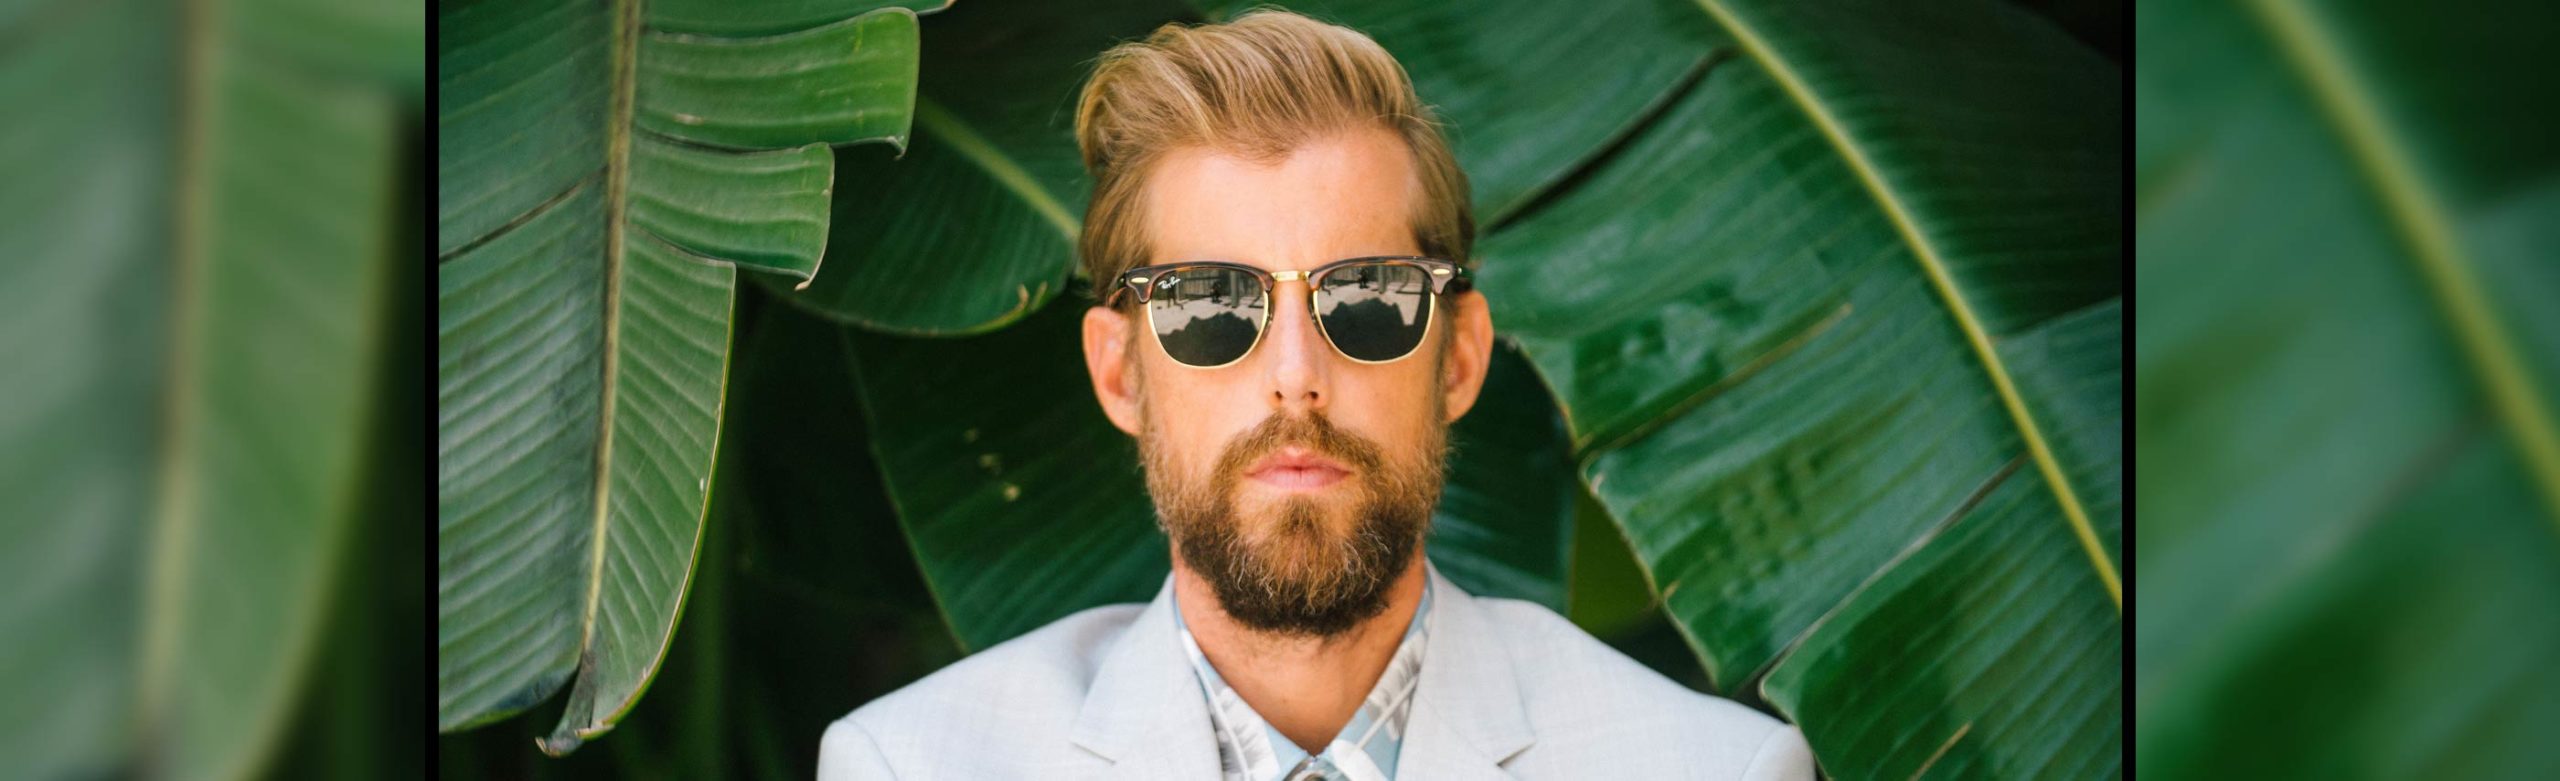 Andrew McMahon In The Wilderness Merch + Ticket Giveaway Image